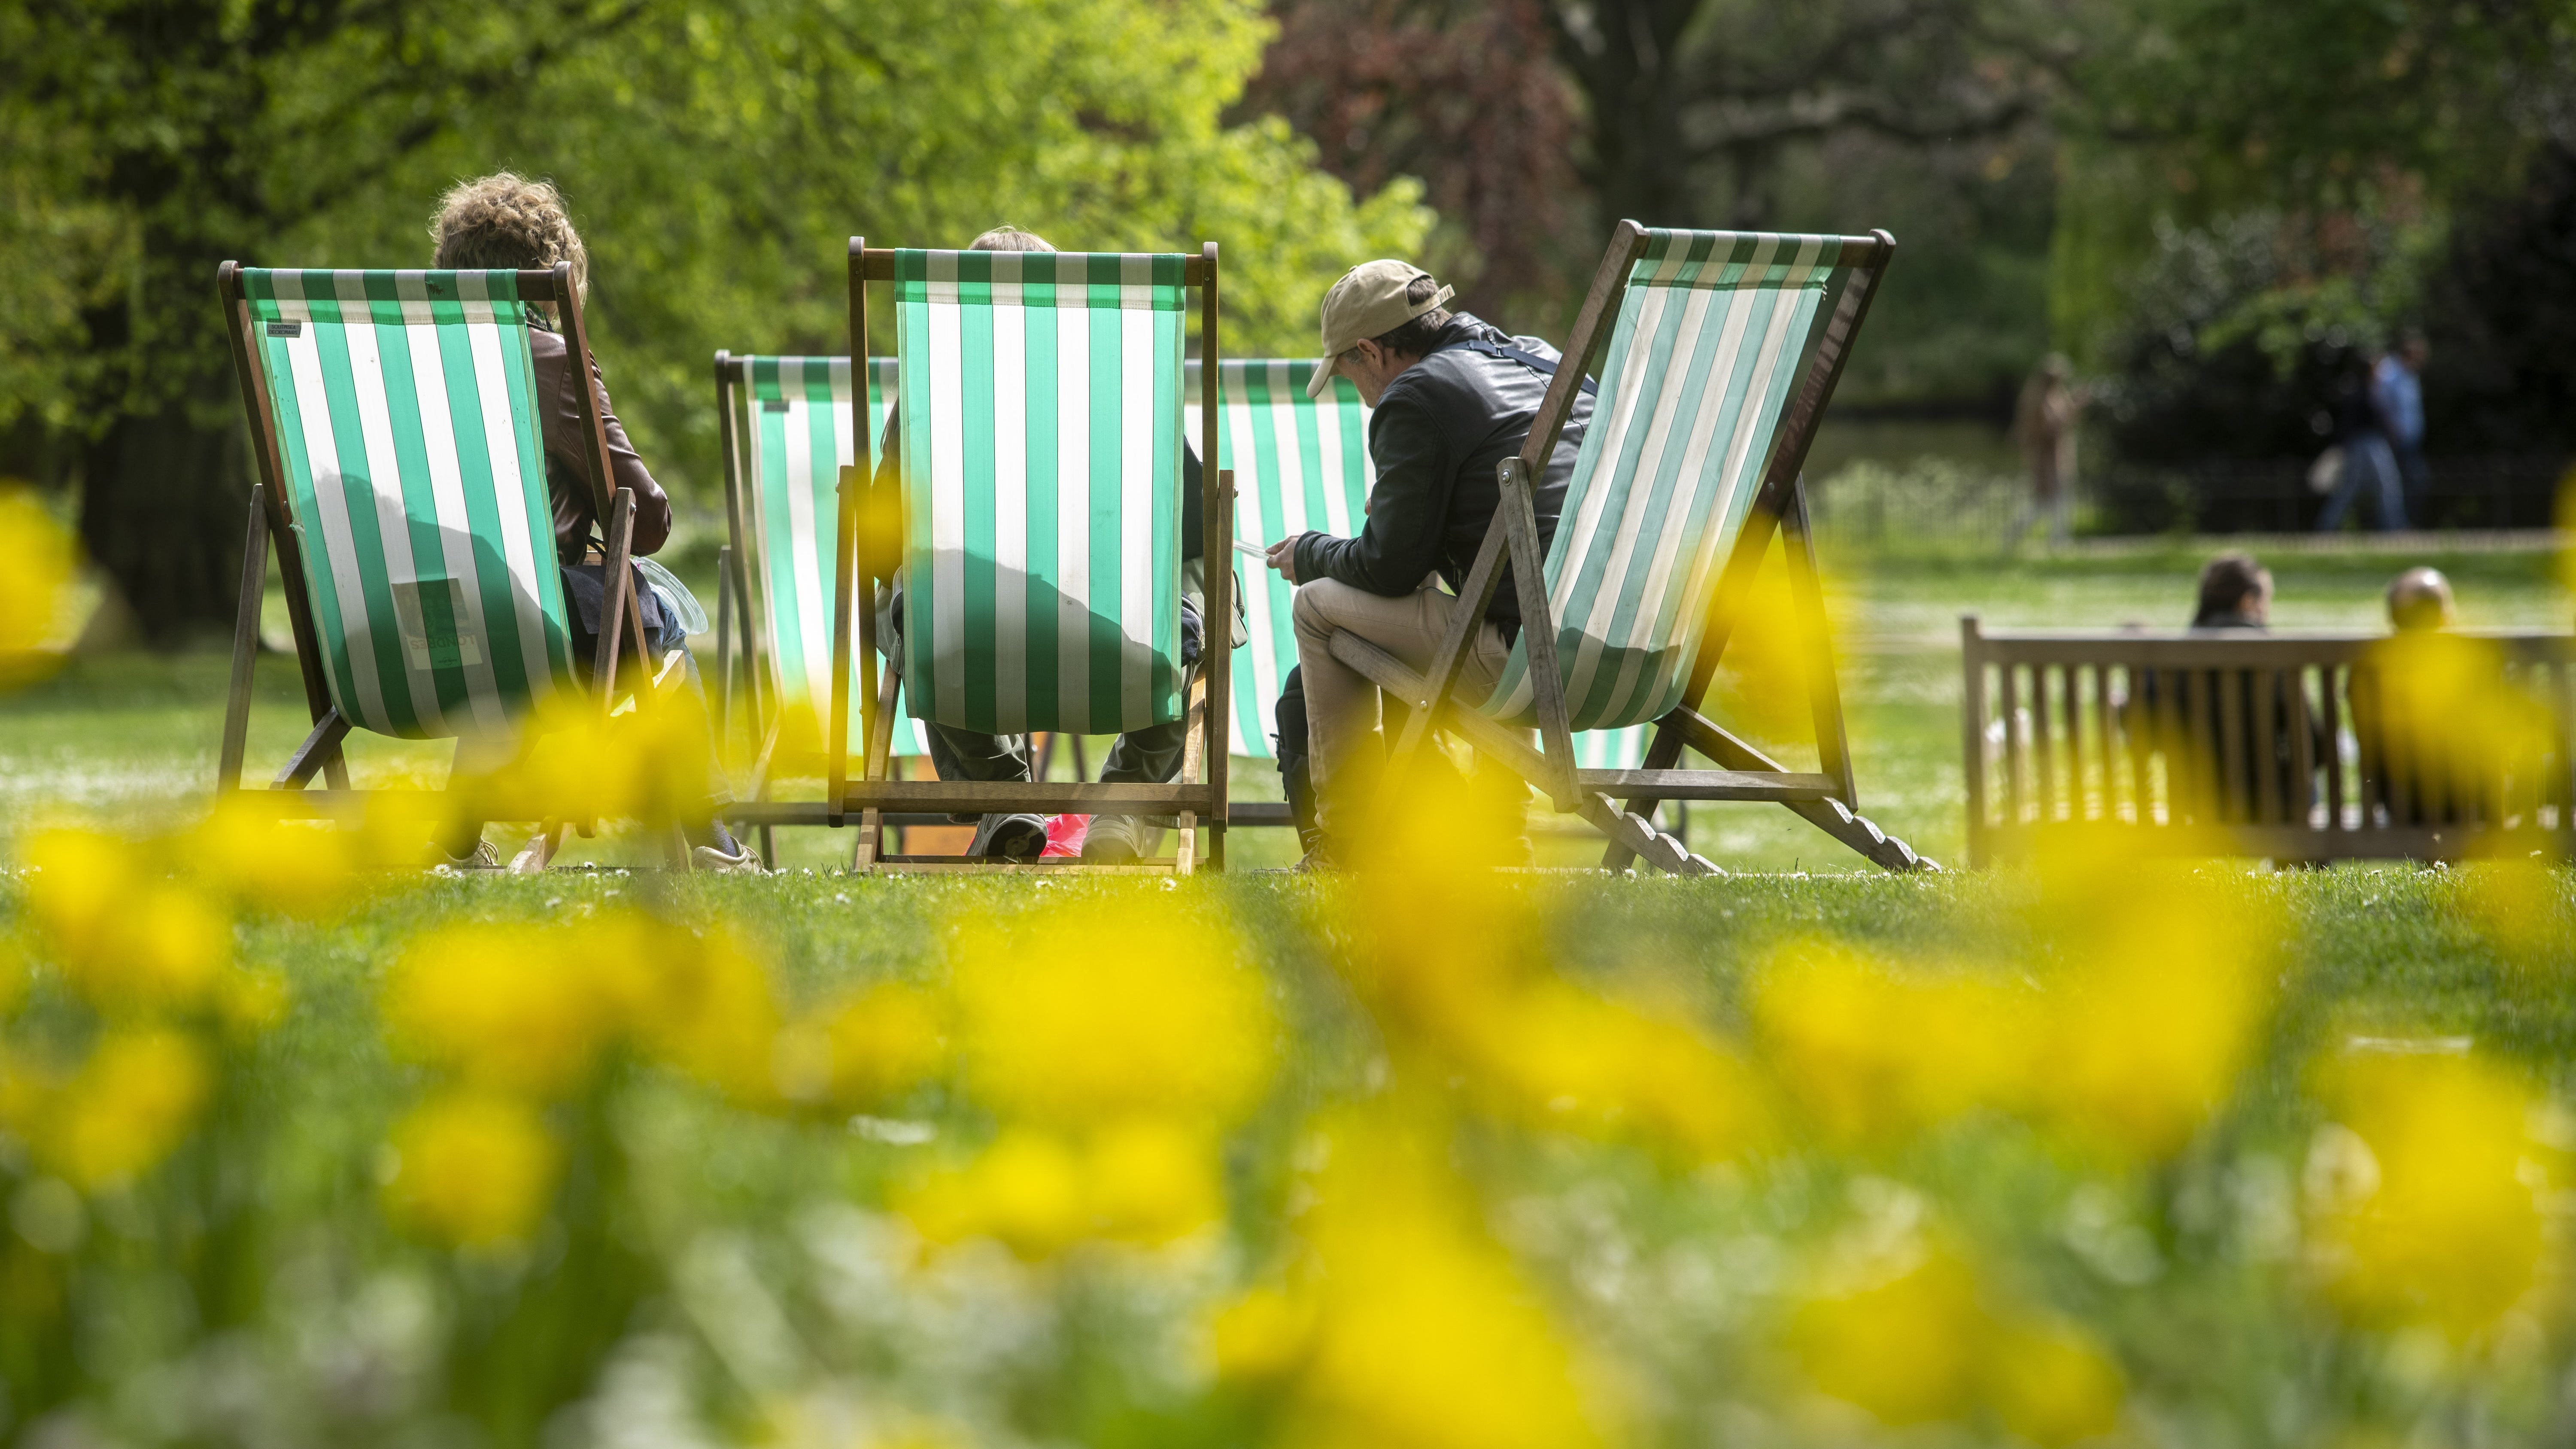 Temperatures set to hit 25C this weekend amid warmer weather across UK